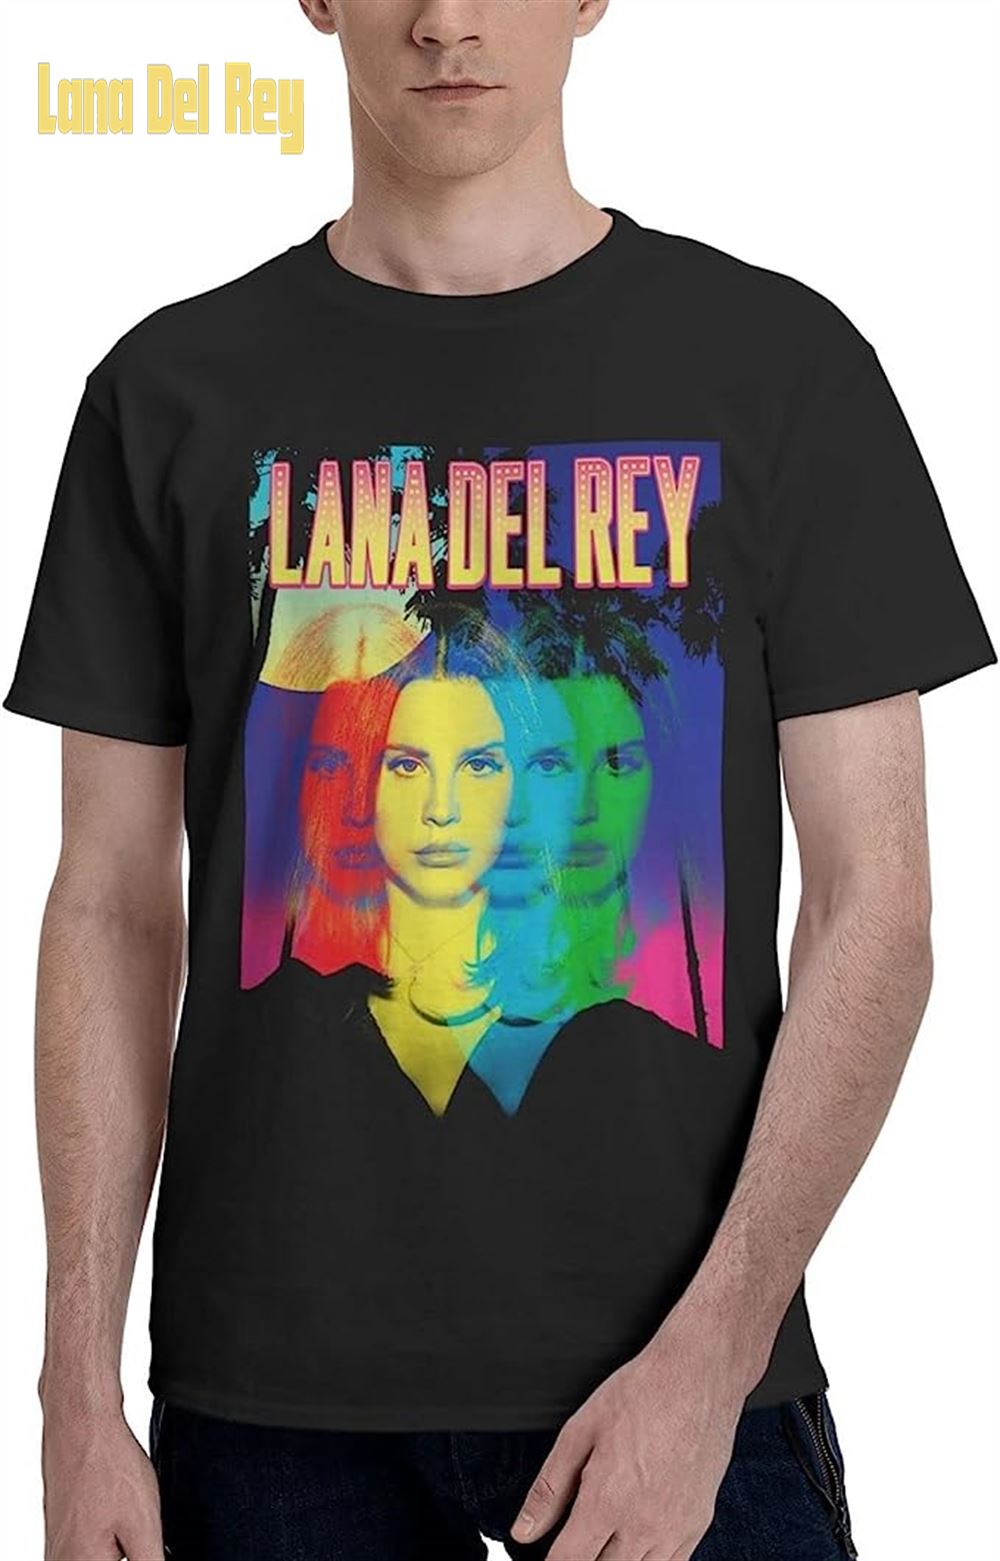 Join the Del Rey Fanbase: Discover the Ultimate Shop